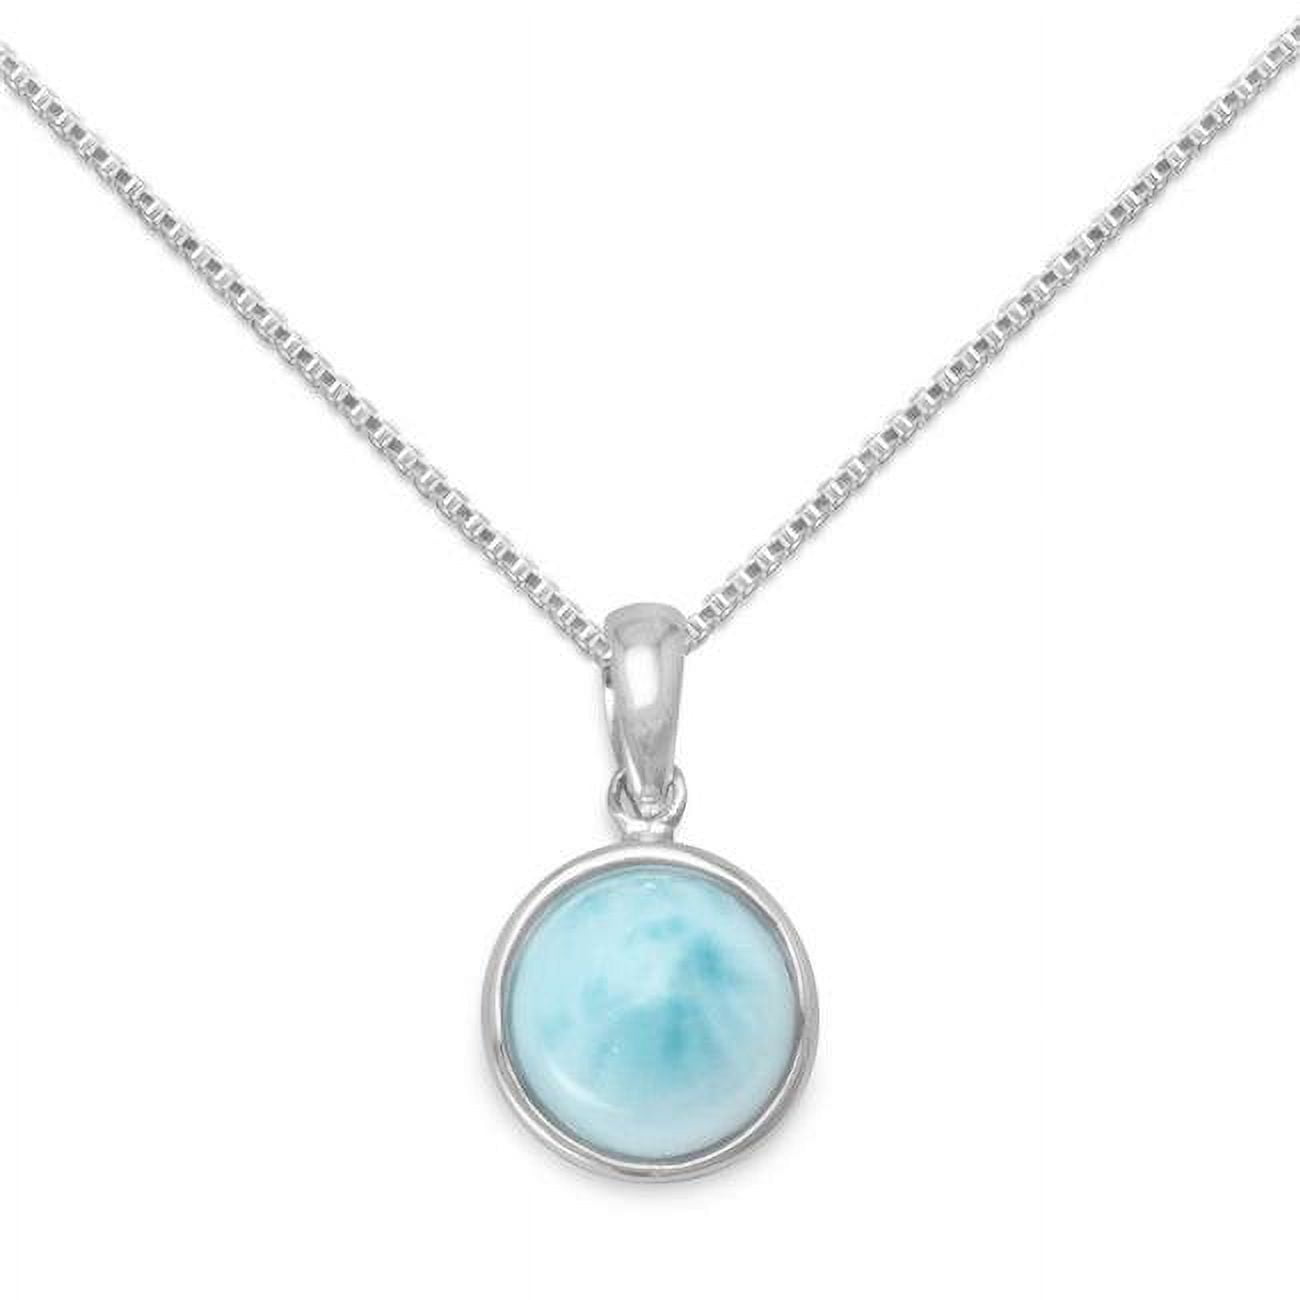 74276-20 20 In. Sterling Silver Round-shape Blue Larimar Pendant With 1.5 Mm Box Chain